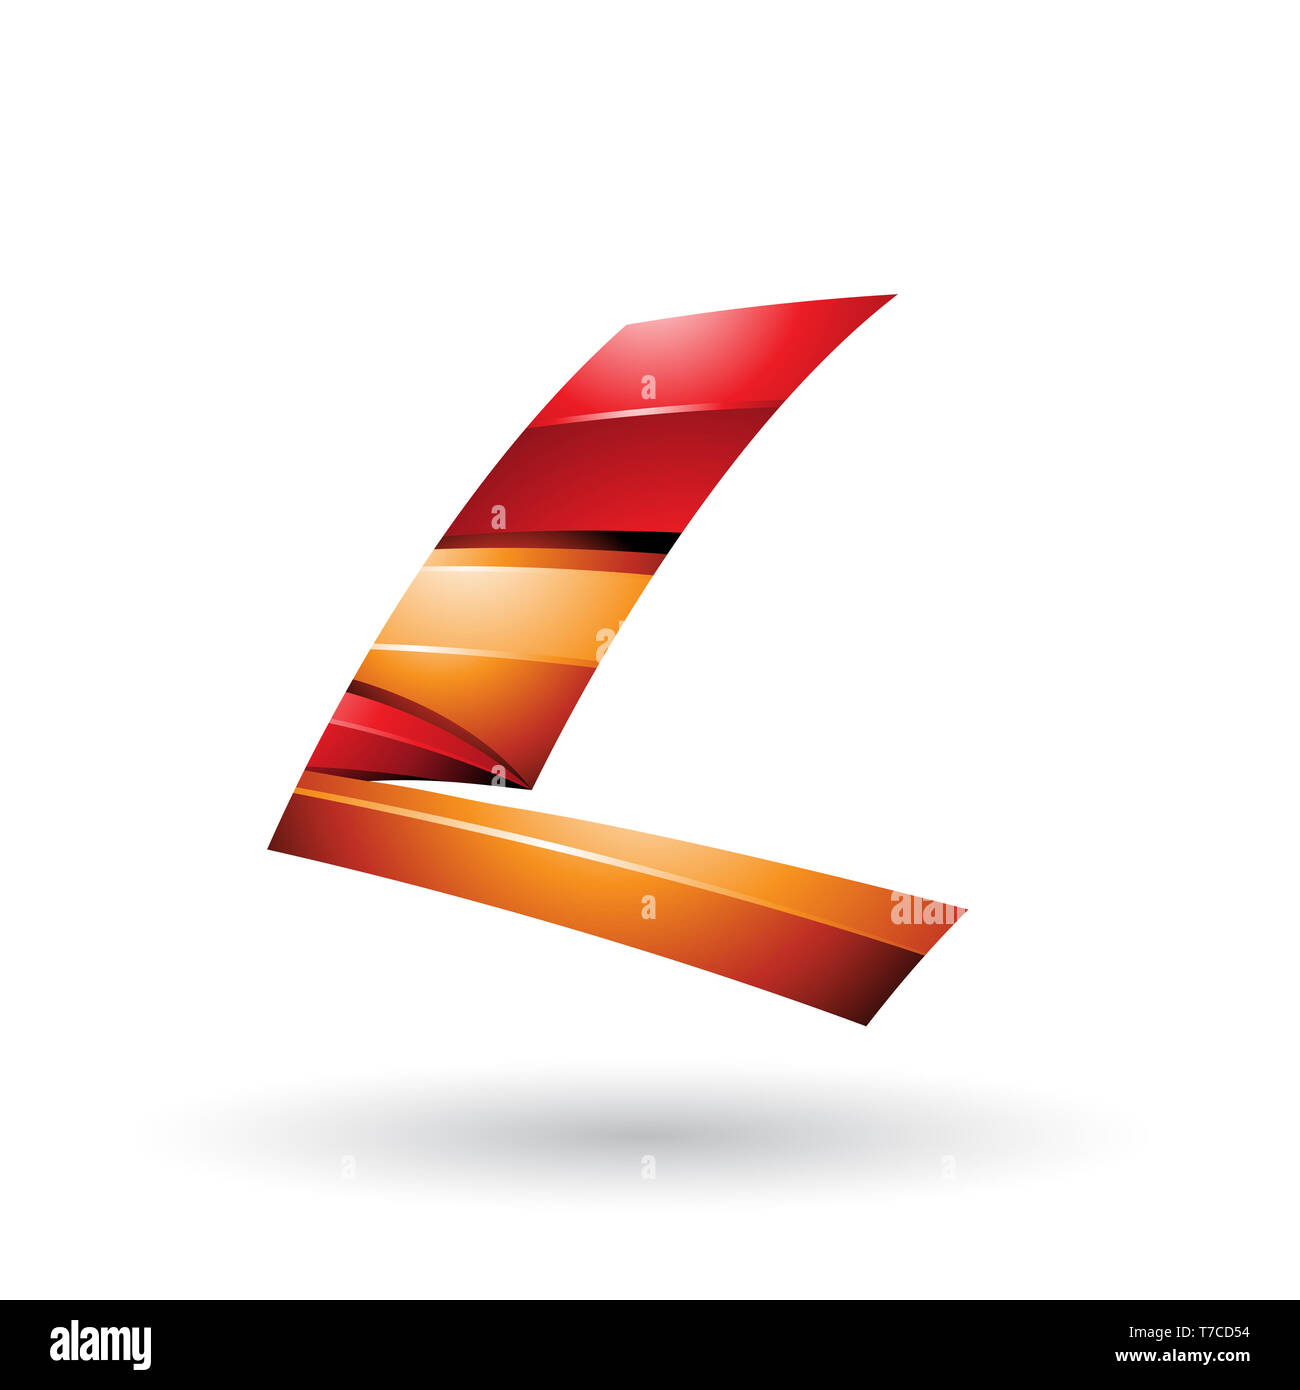 https://c8.alamy.com/comp/T7CD54/vector-illustration-of-red-and-orange-dynamic-glossy-flying-letter-l-isolated-on-a-white-background-T7CD54.jpg